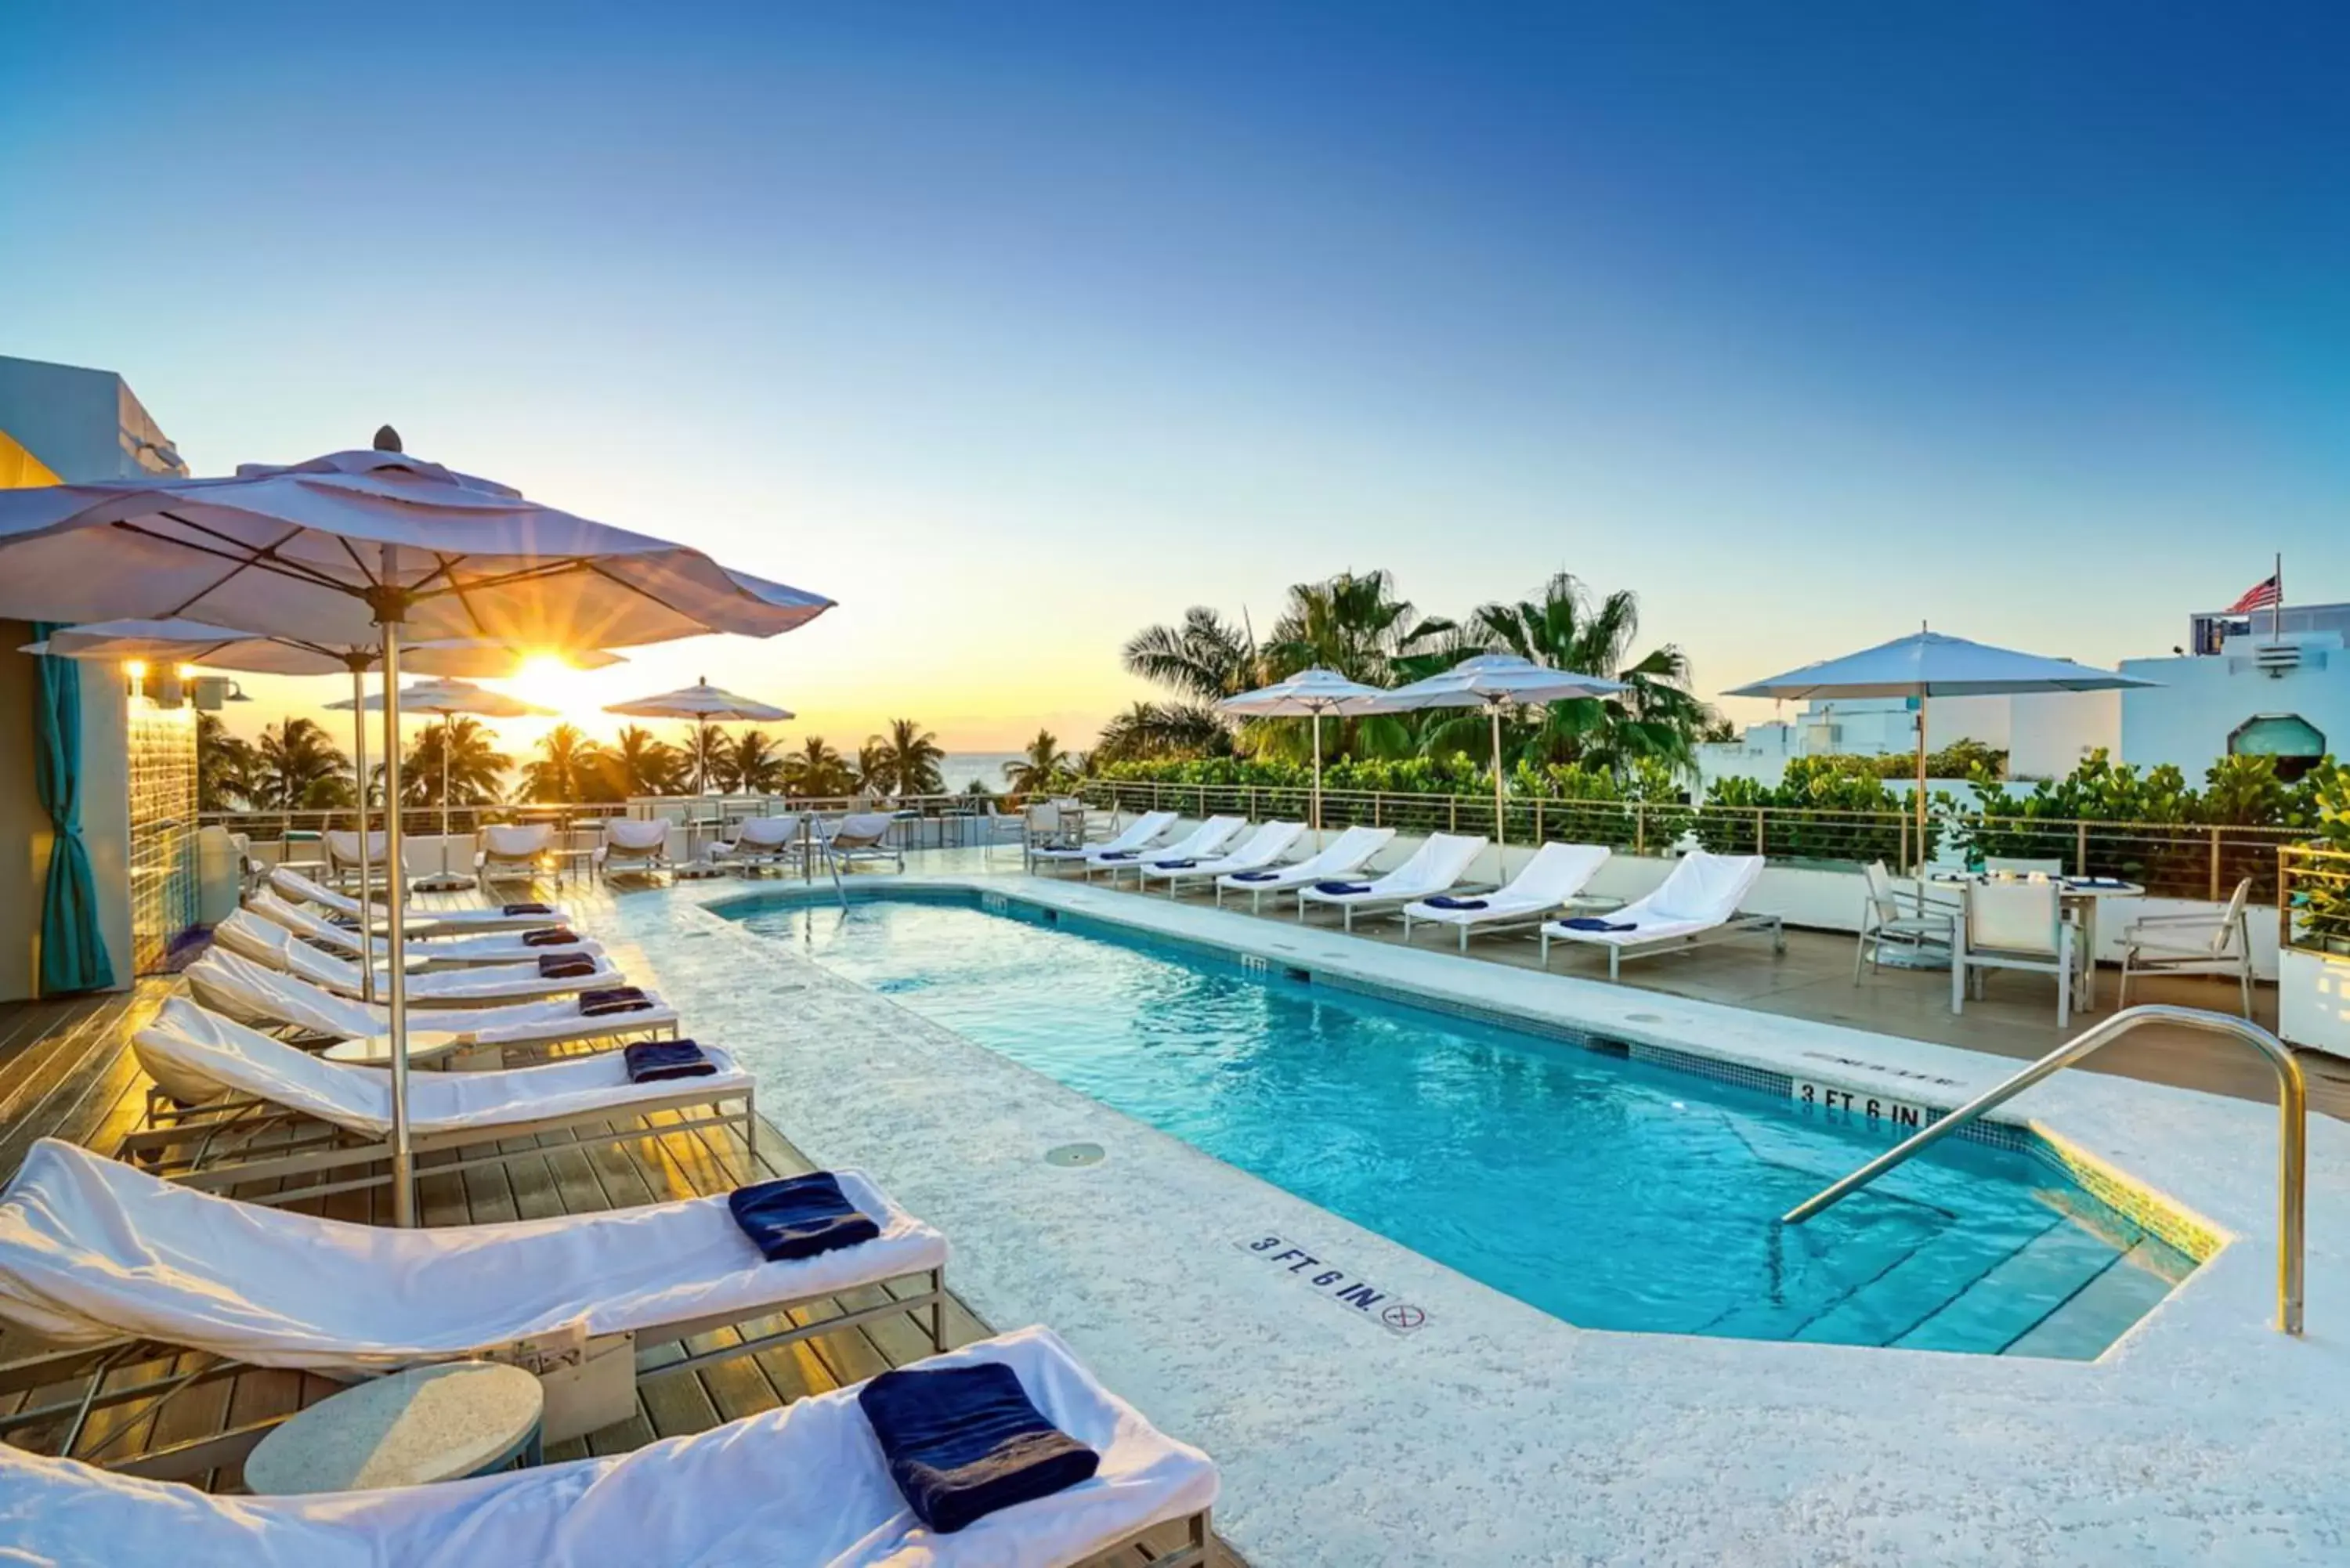 Swimming Pool in The Tony Hotel South Beach